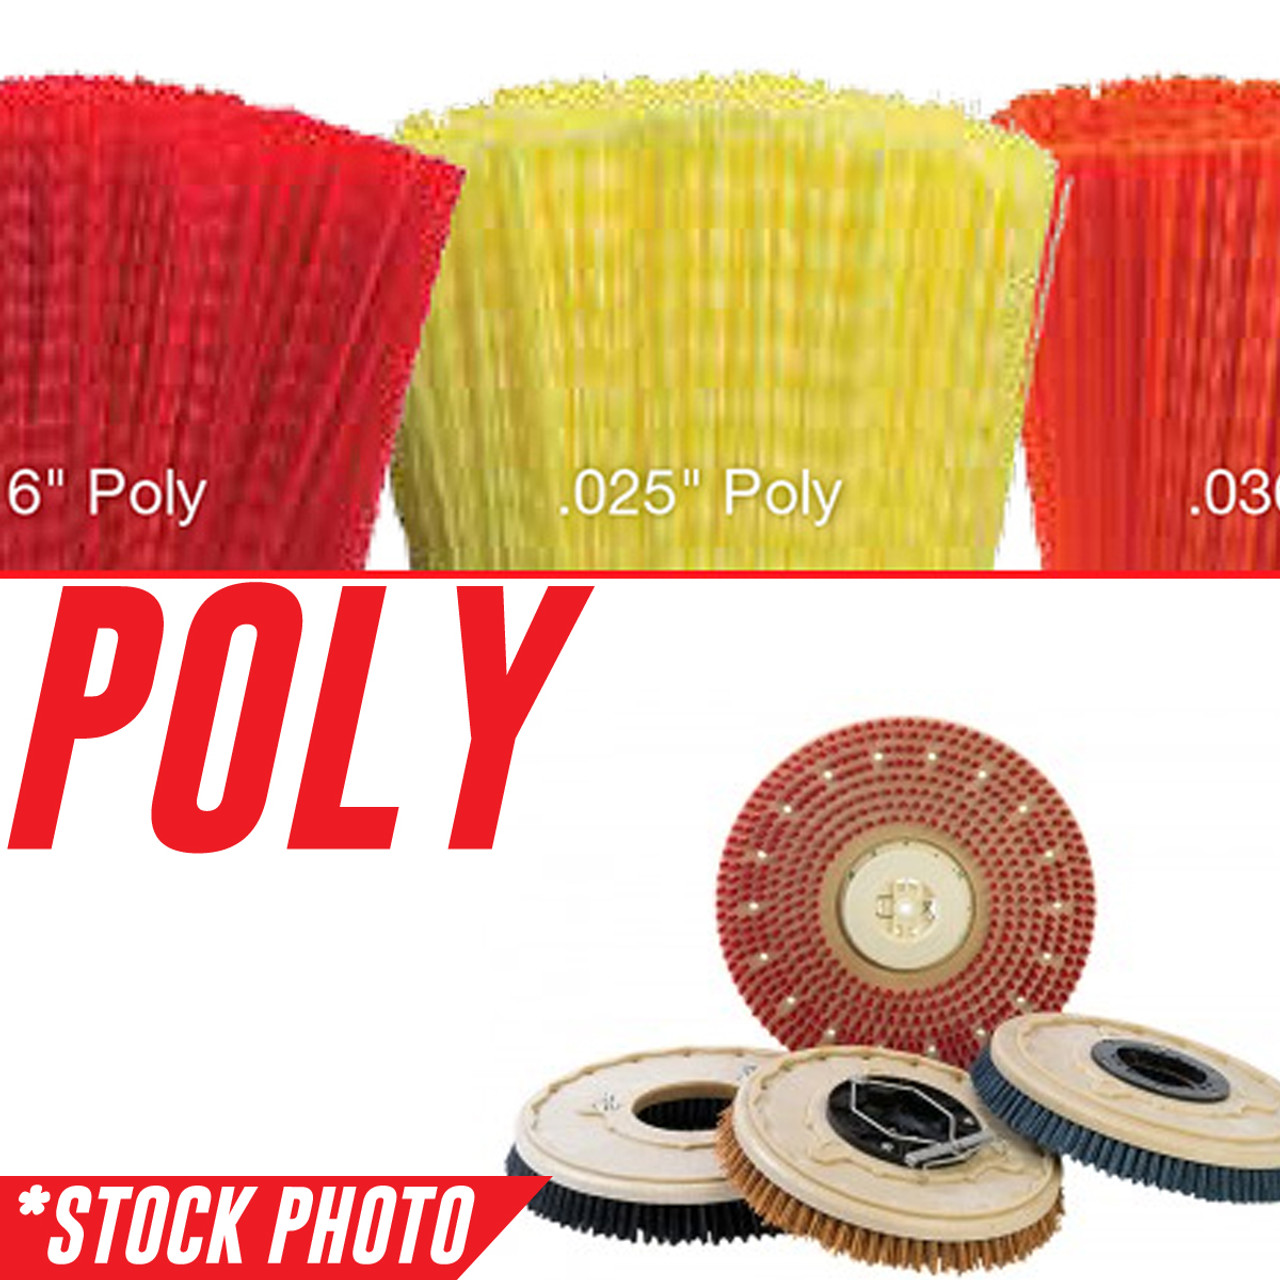 0765-272: 20" Rotary Brush .028" Poly fits American-Lincoln Models SC7730-40, SC7740-40, Smart 40